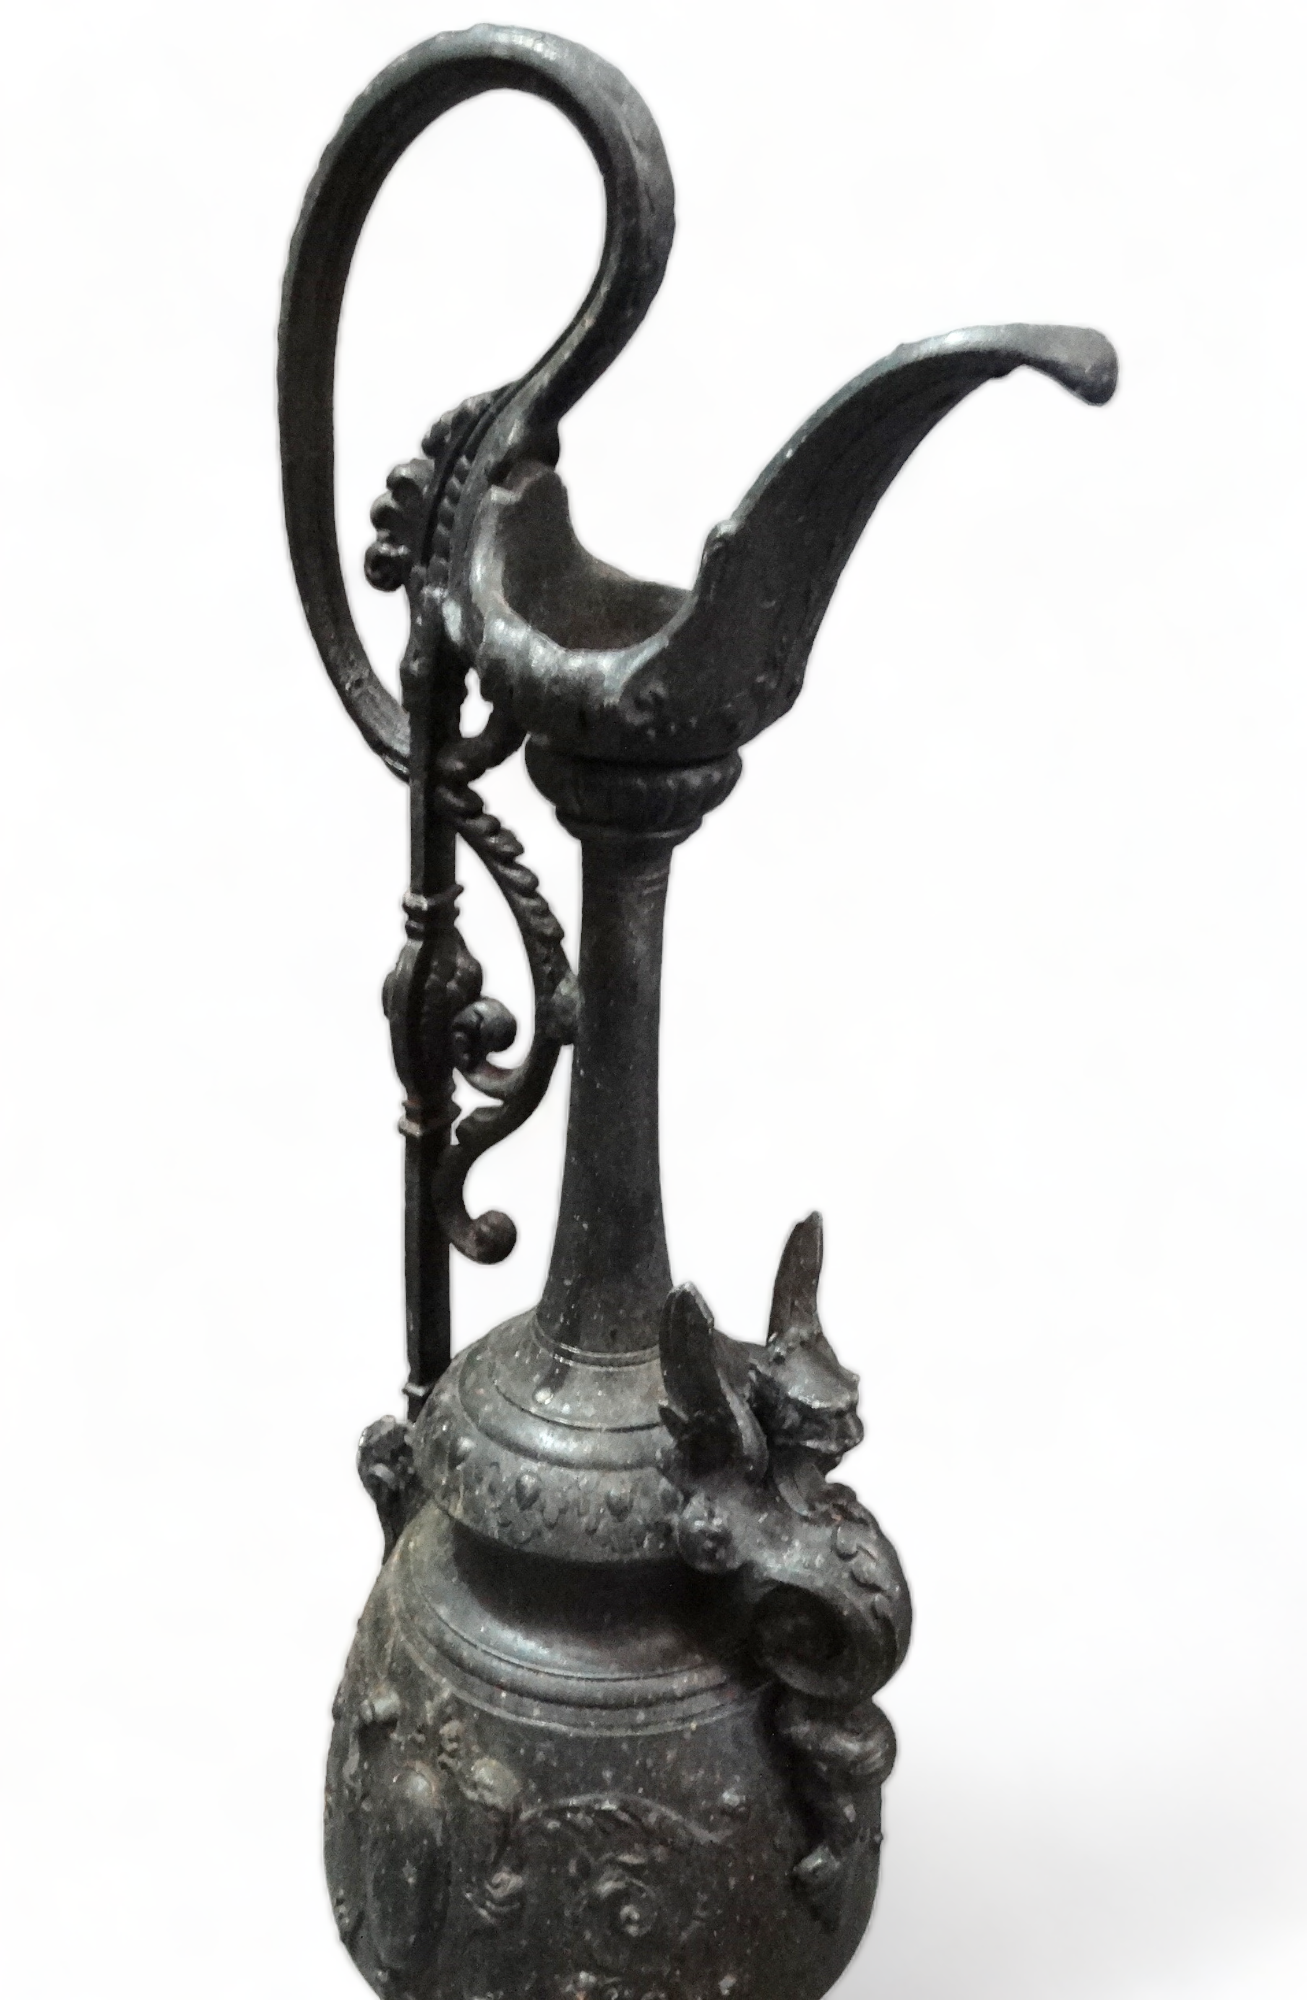 After the antique, a cast metal ewer - decorated with flowers and masks on a socle base, height - Image 3 of 5